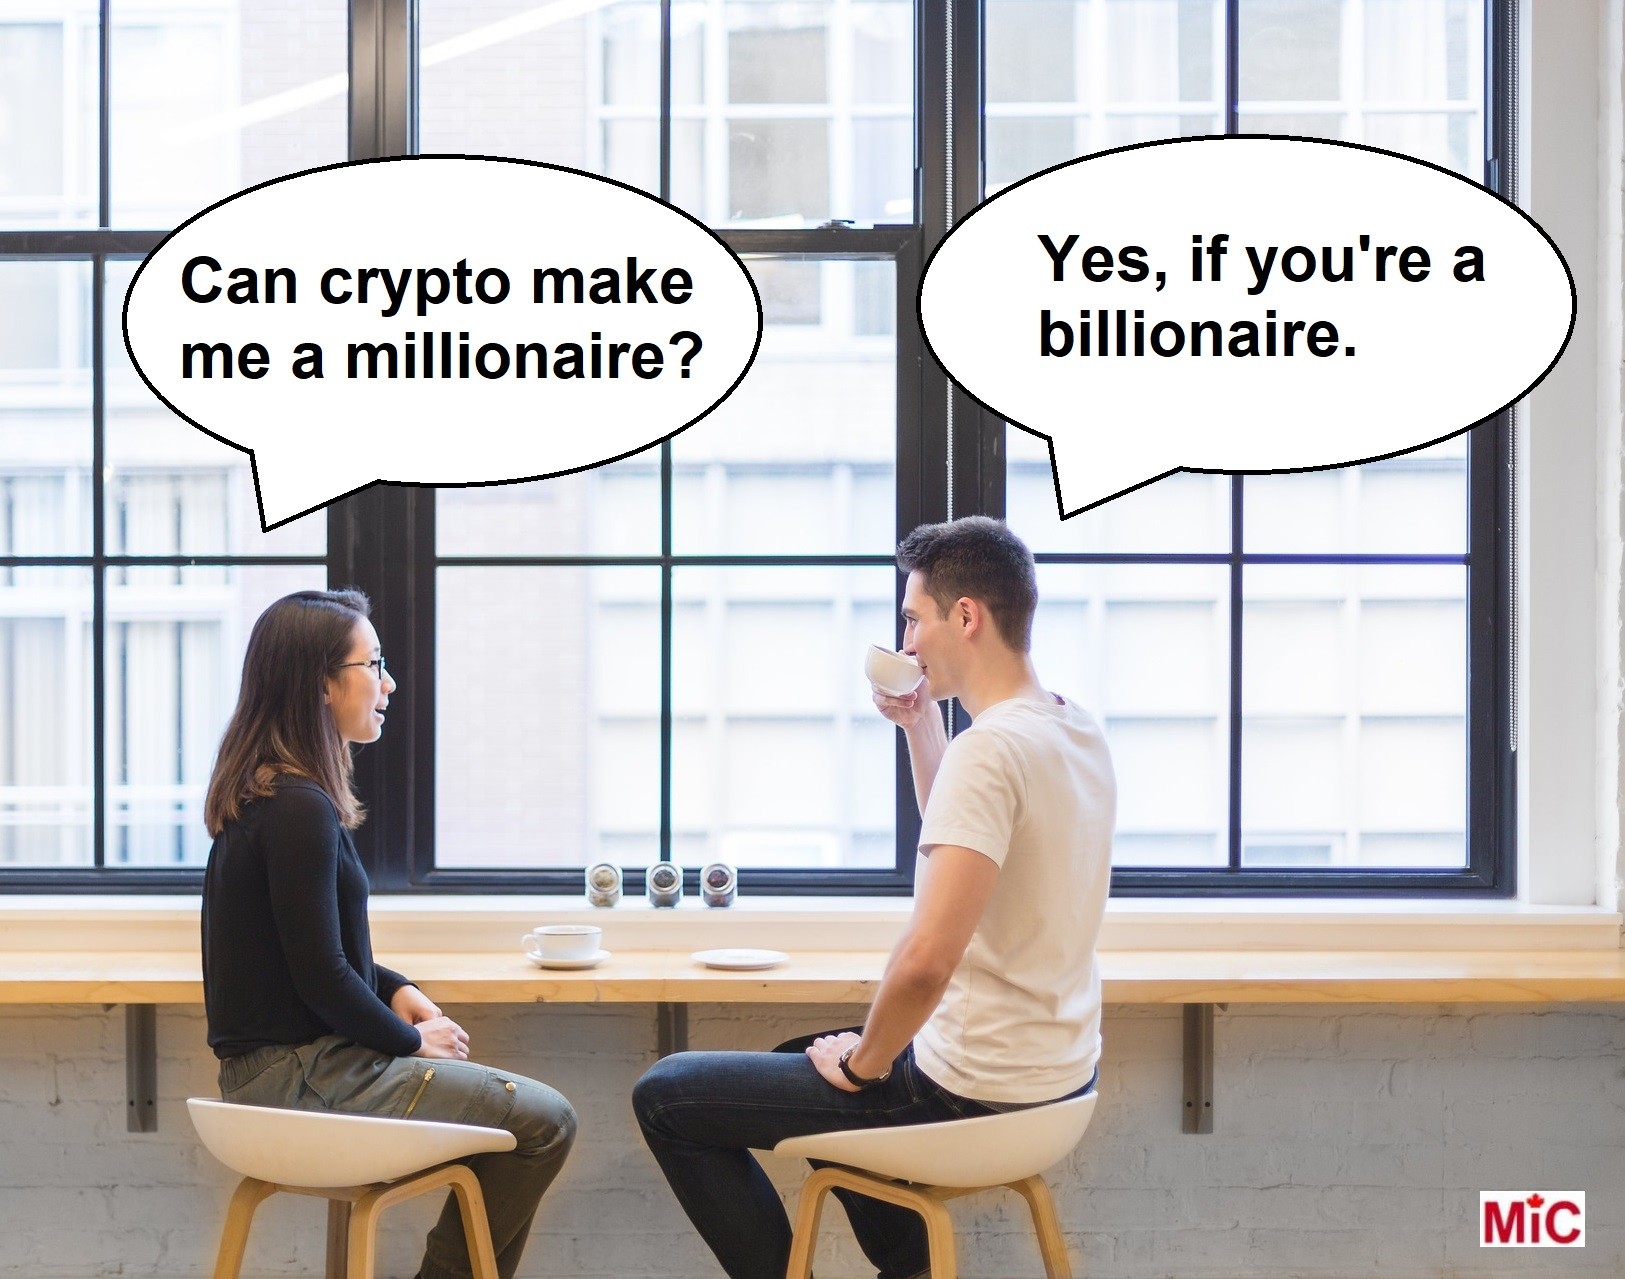 2 people talking
Person 1 - Can crypto make me a millionaire?
Person 2 - Yes, if you're a billionaire.